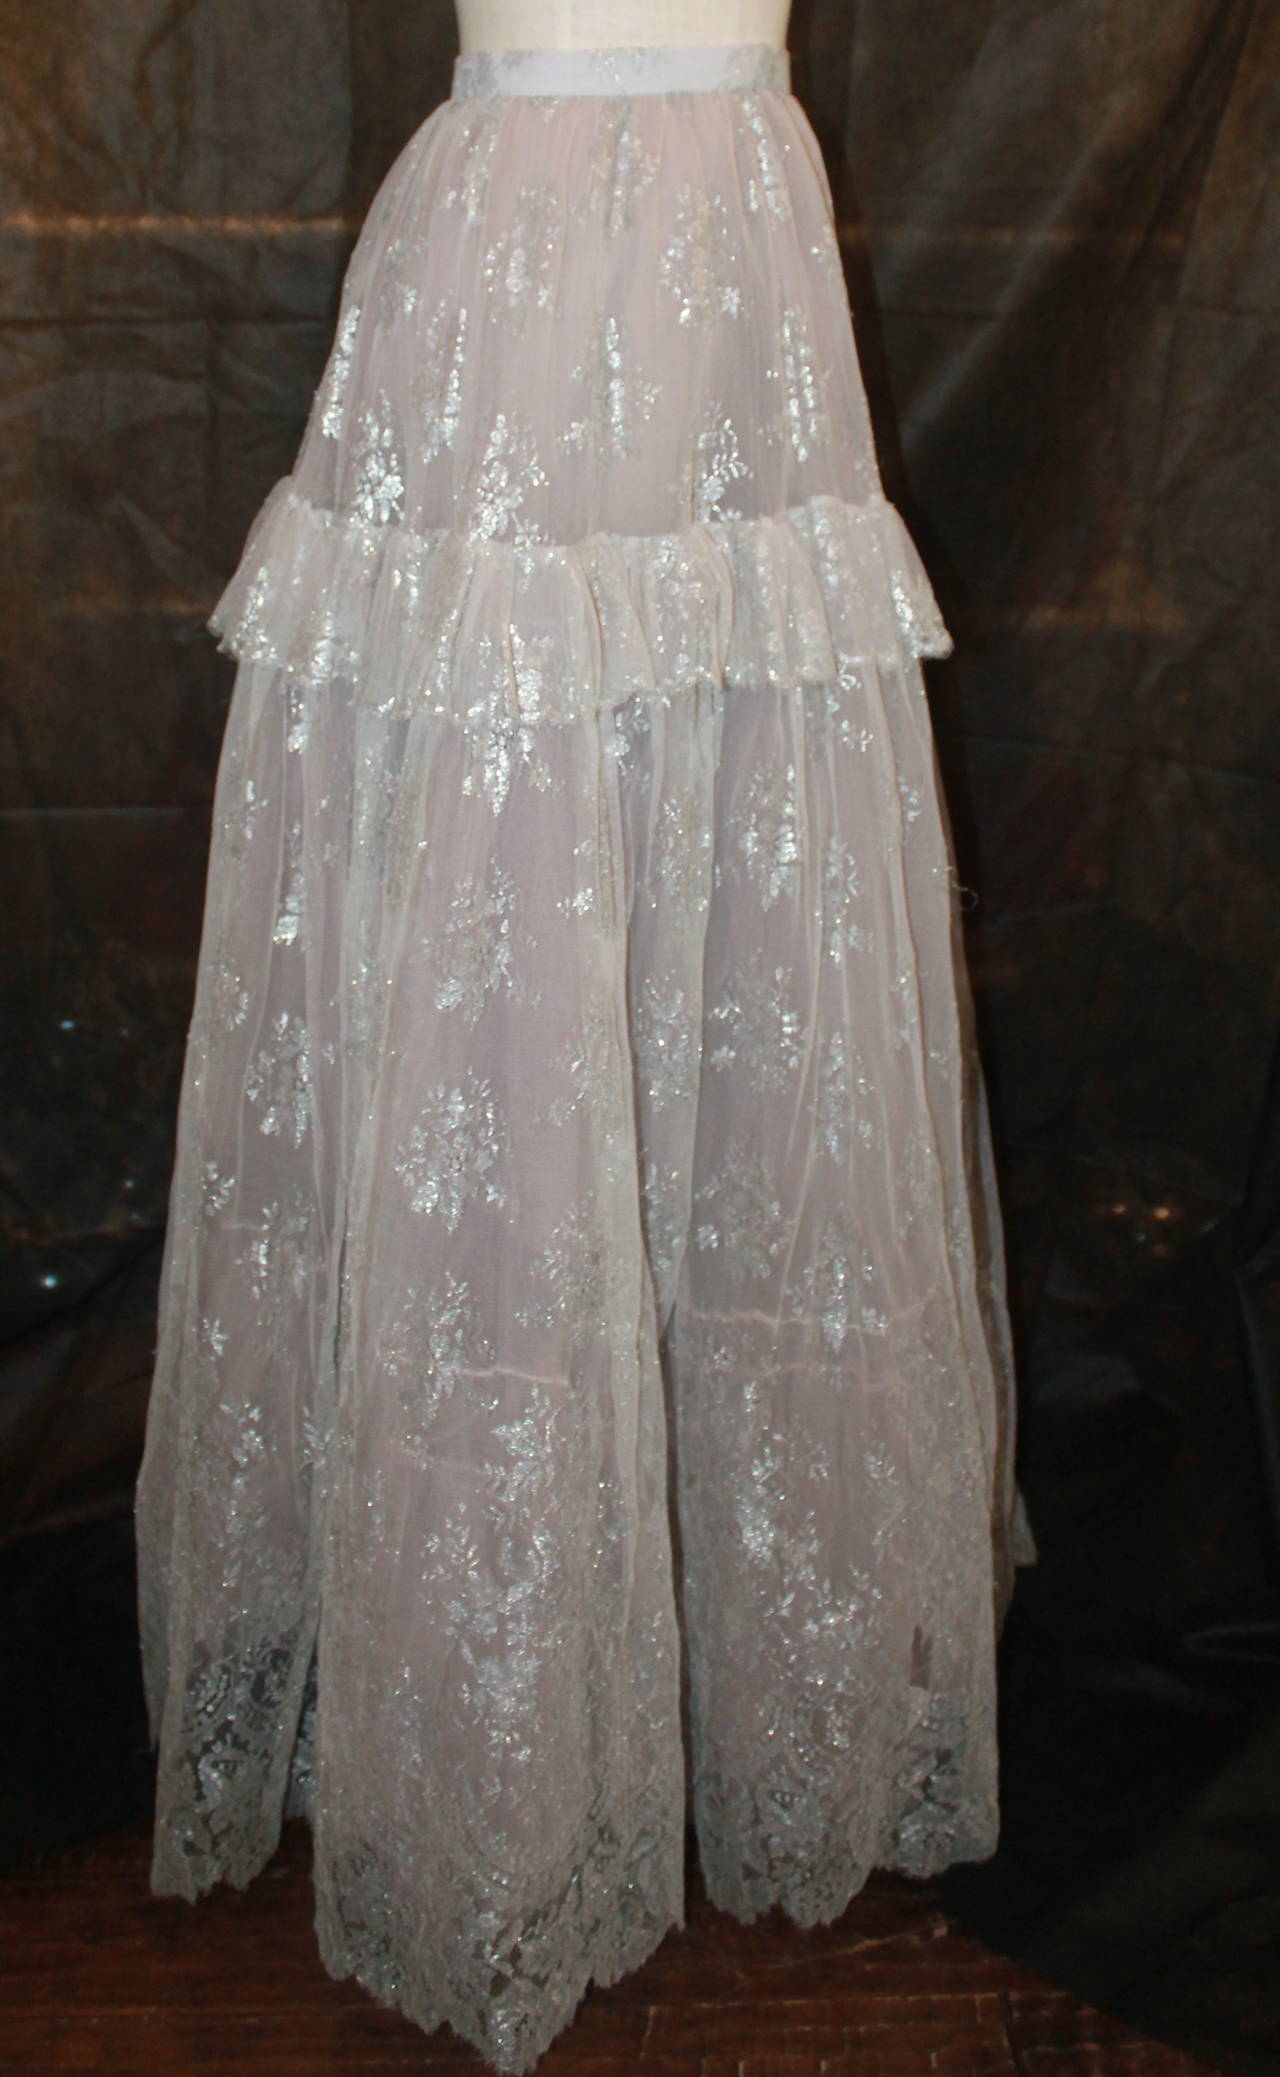 Oscar De La Renta 1990's Vintage Silver Lace & Tulle Ball Skirt - 4. This skirt is in impeccable condition.

**This skirt has a matching top in the store**

Measurements:
Waist- 26